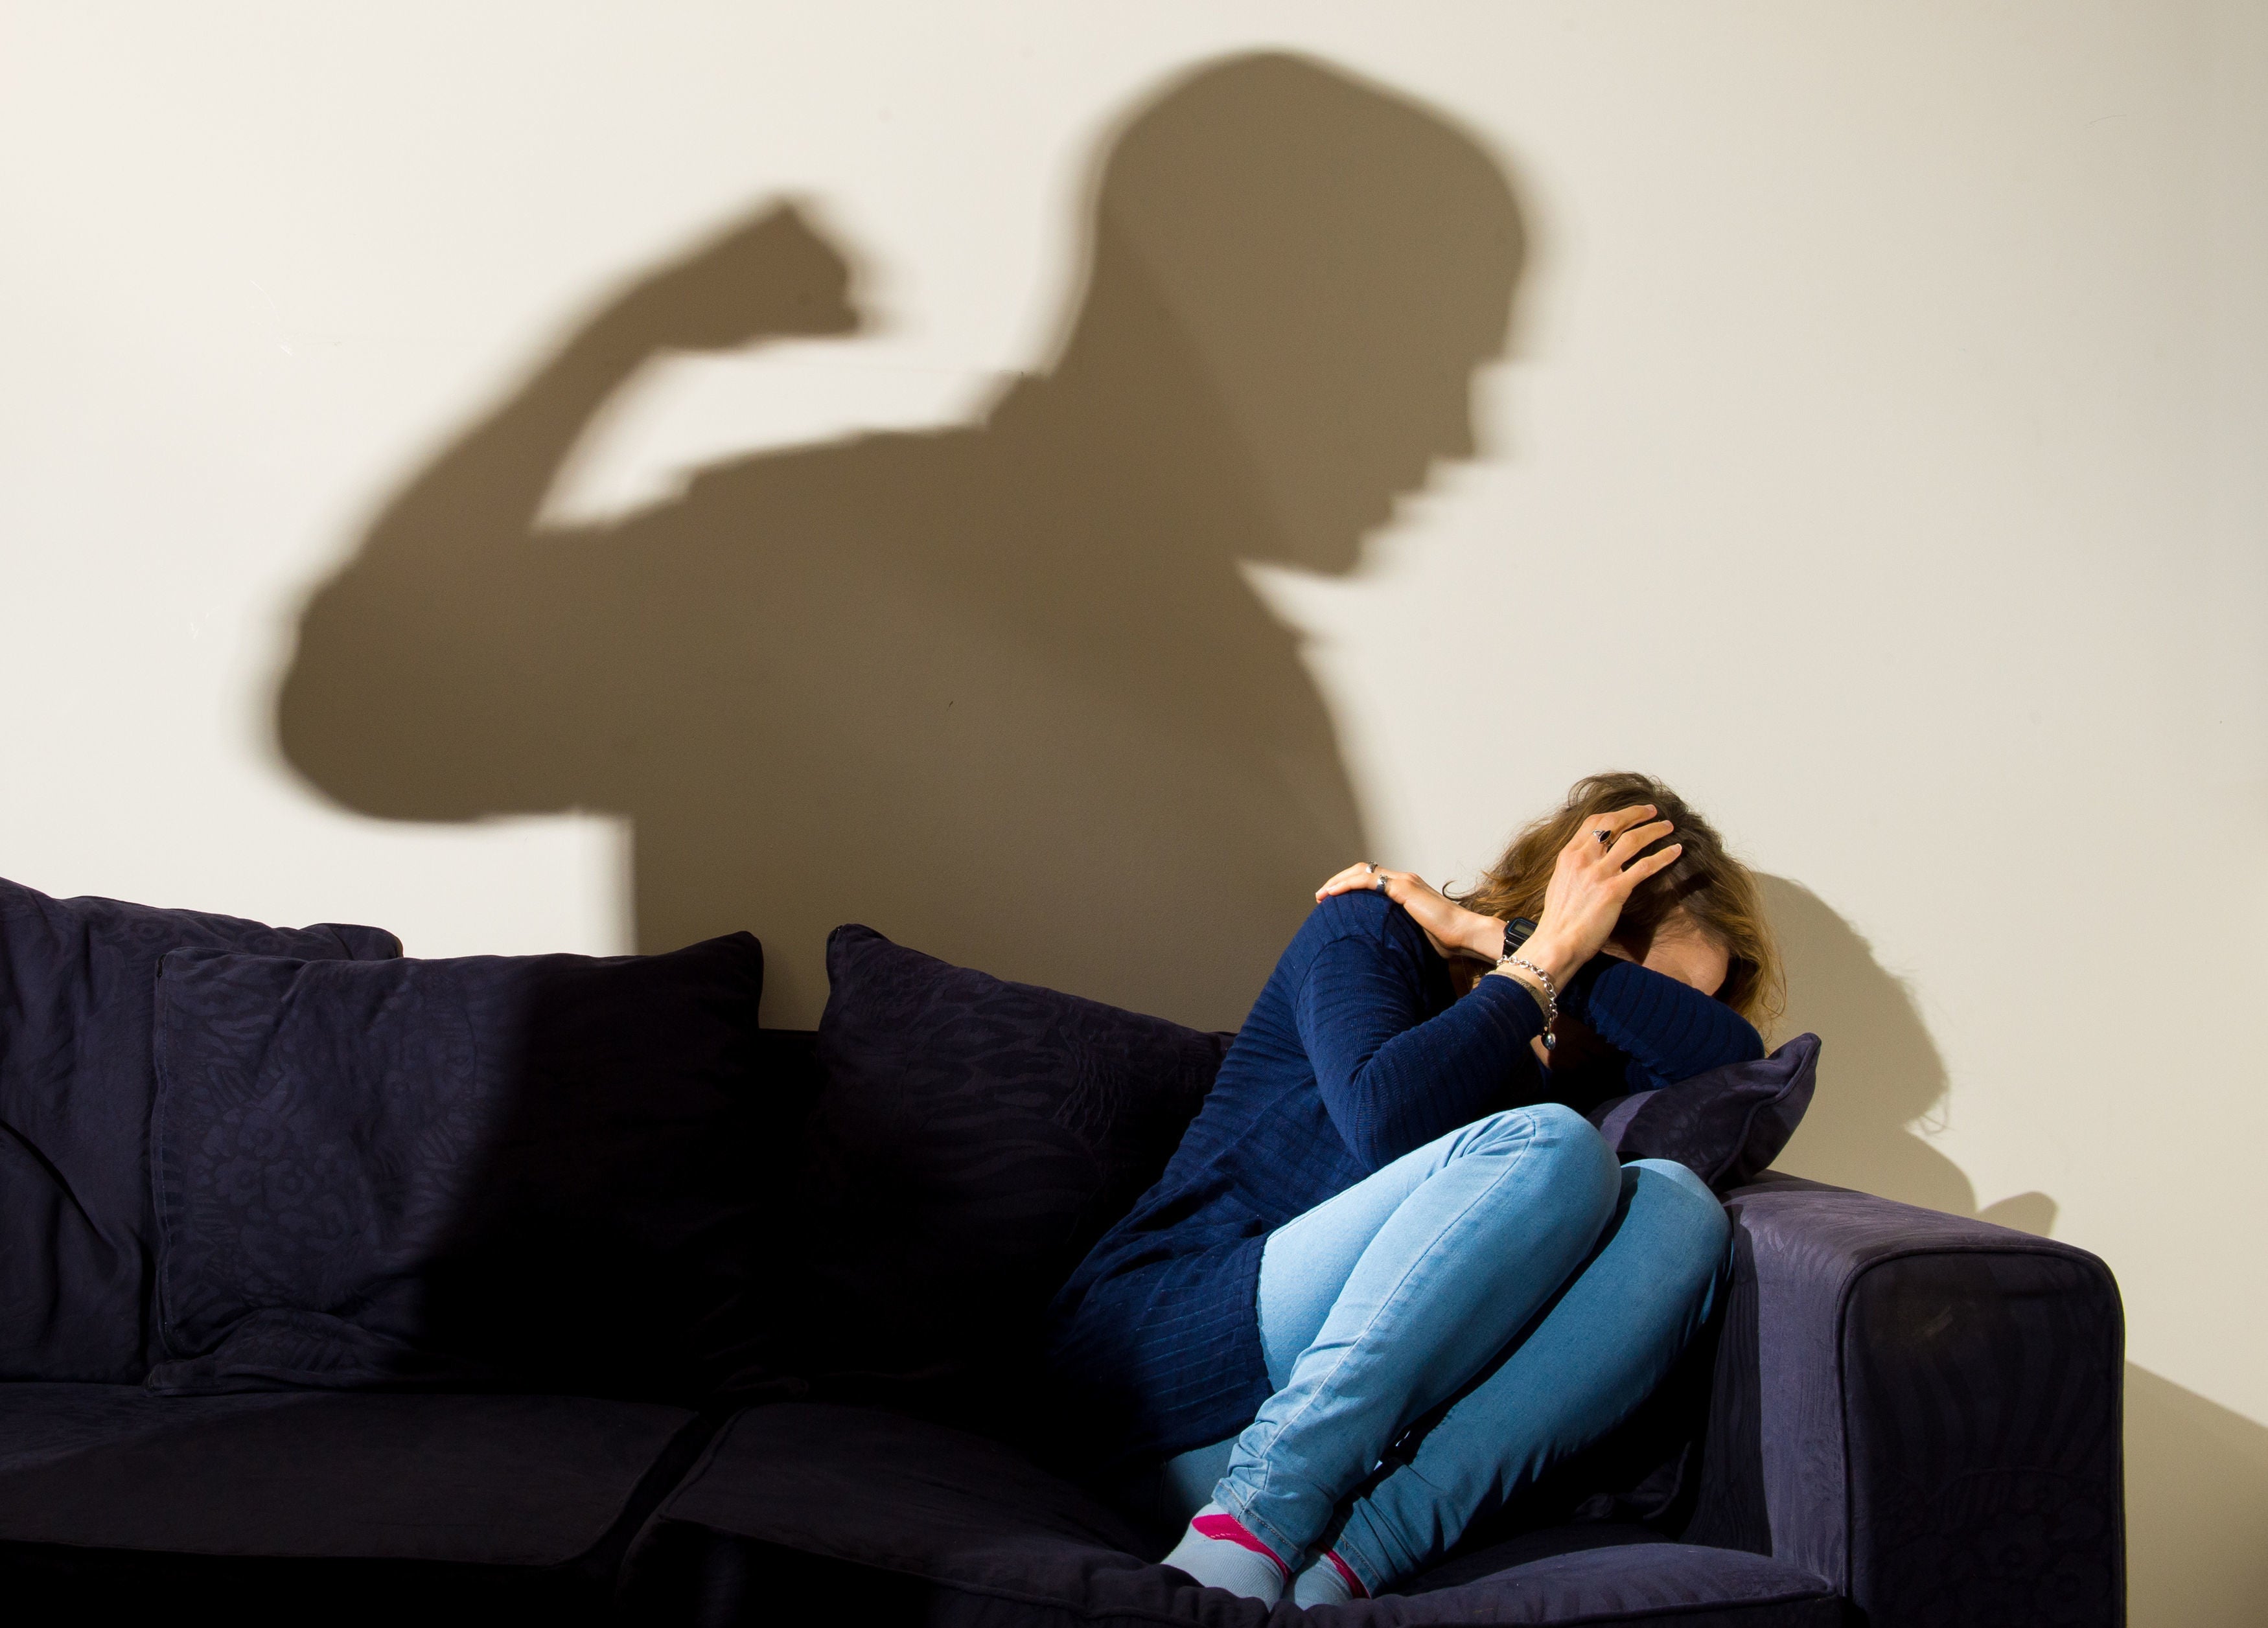 Calls to the UK’s national domestic abuse helpline soared by 22 per cent